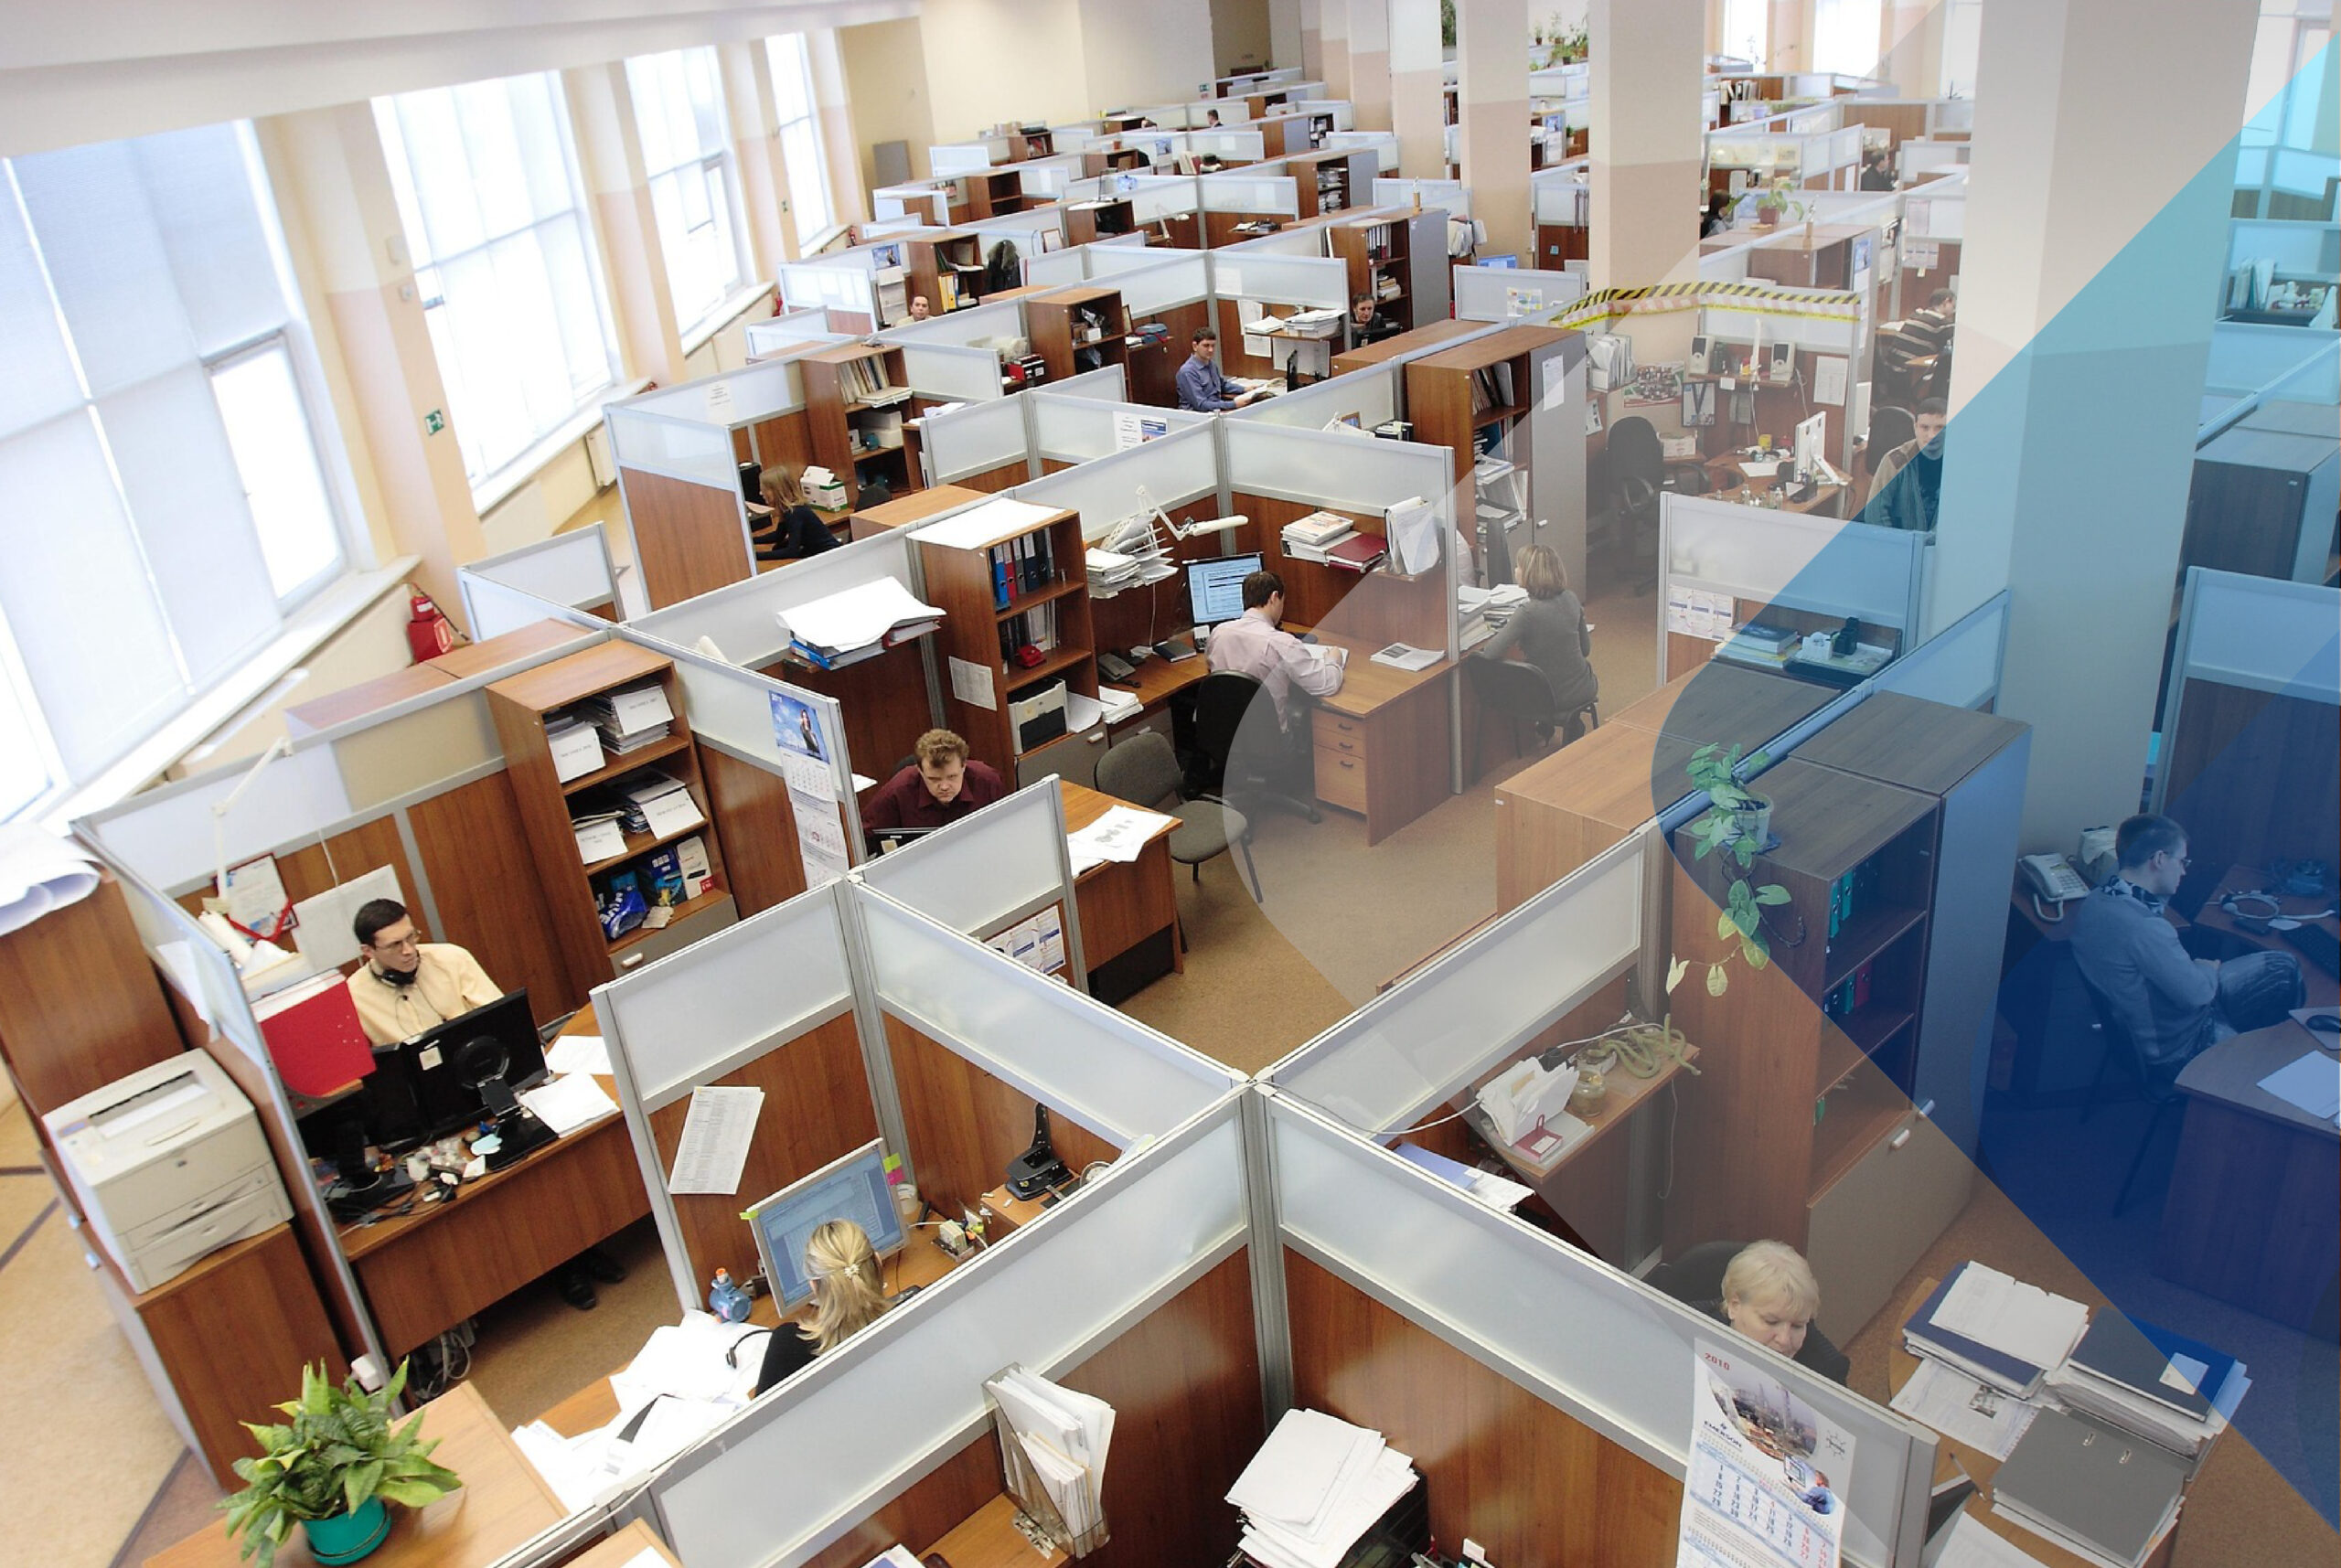 Stock image of an office to accompany article on employee retention strategies